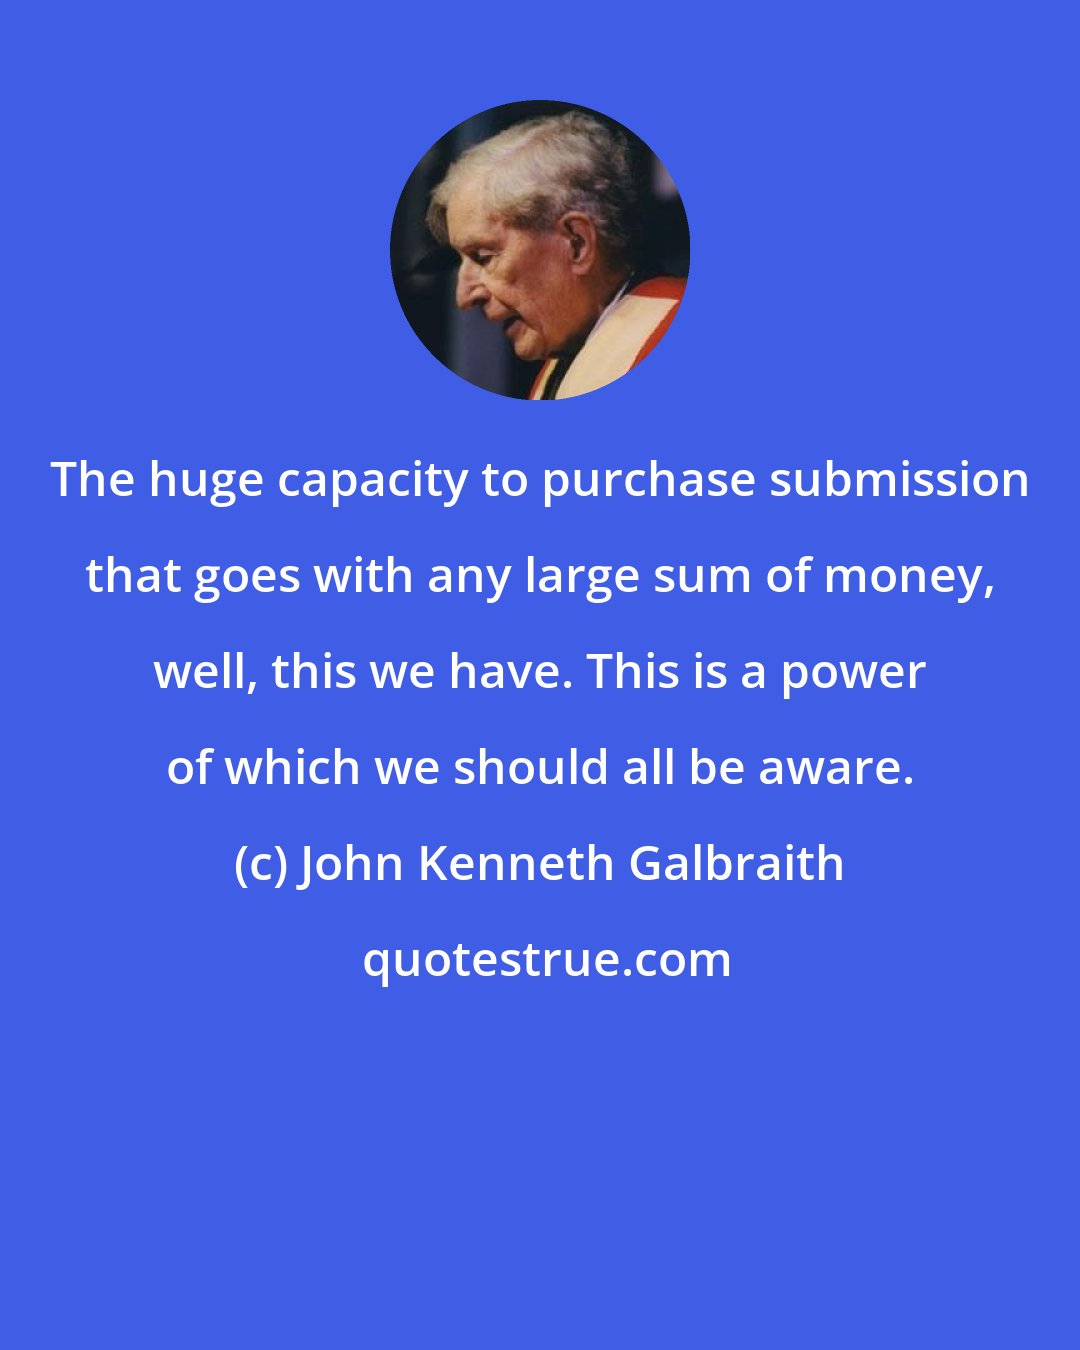 John Kenneth Galbraith: The huge capacity to purchase submission that goes with any large sum of money, well, this we have. This is a power of which we should all be aware.